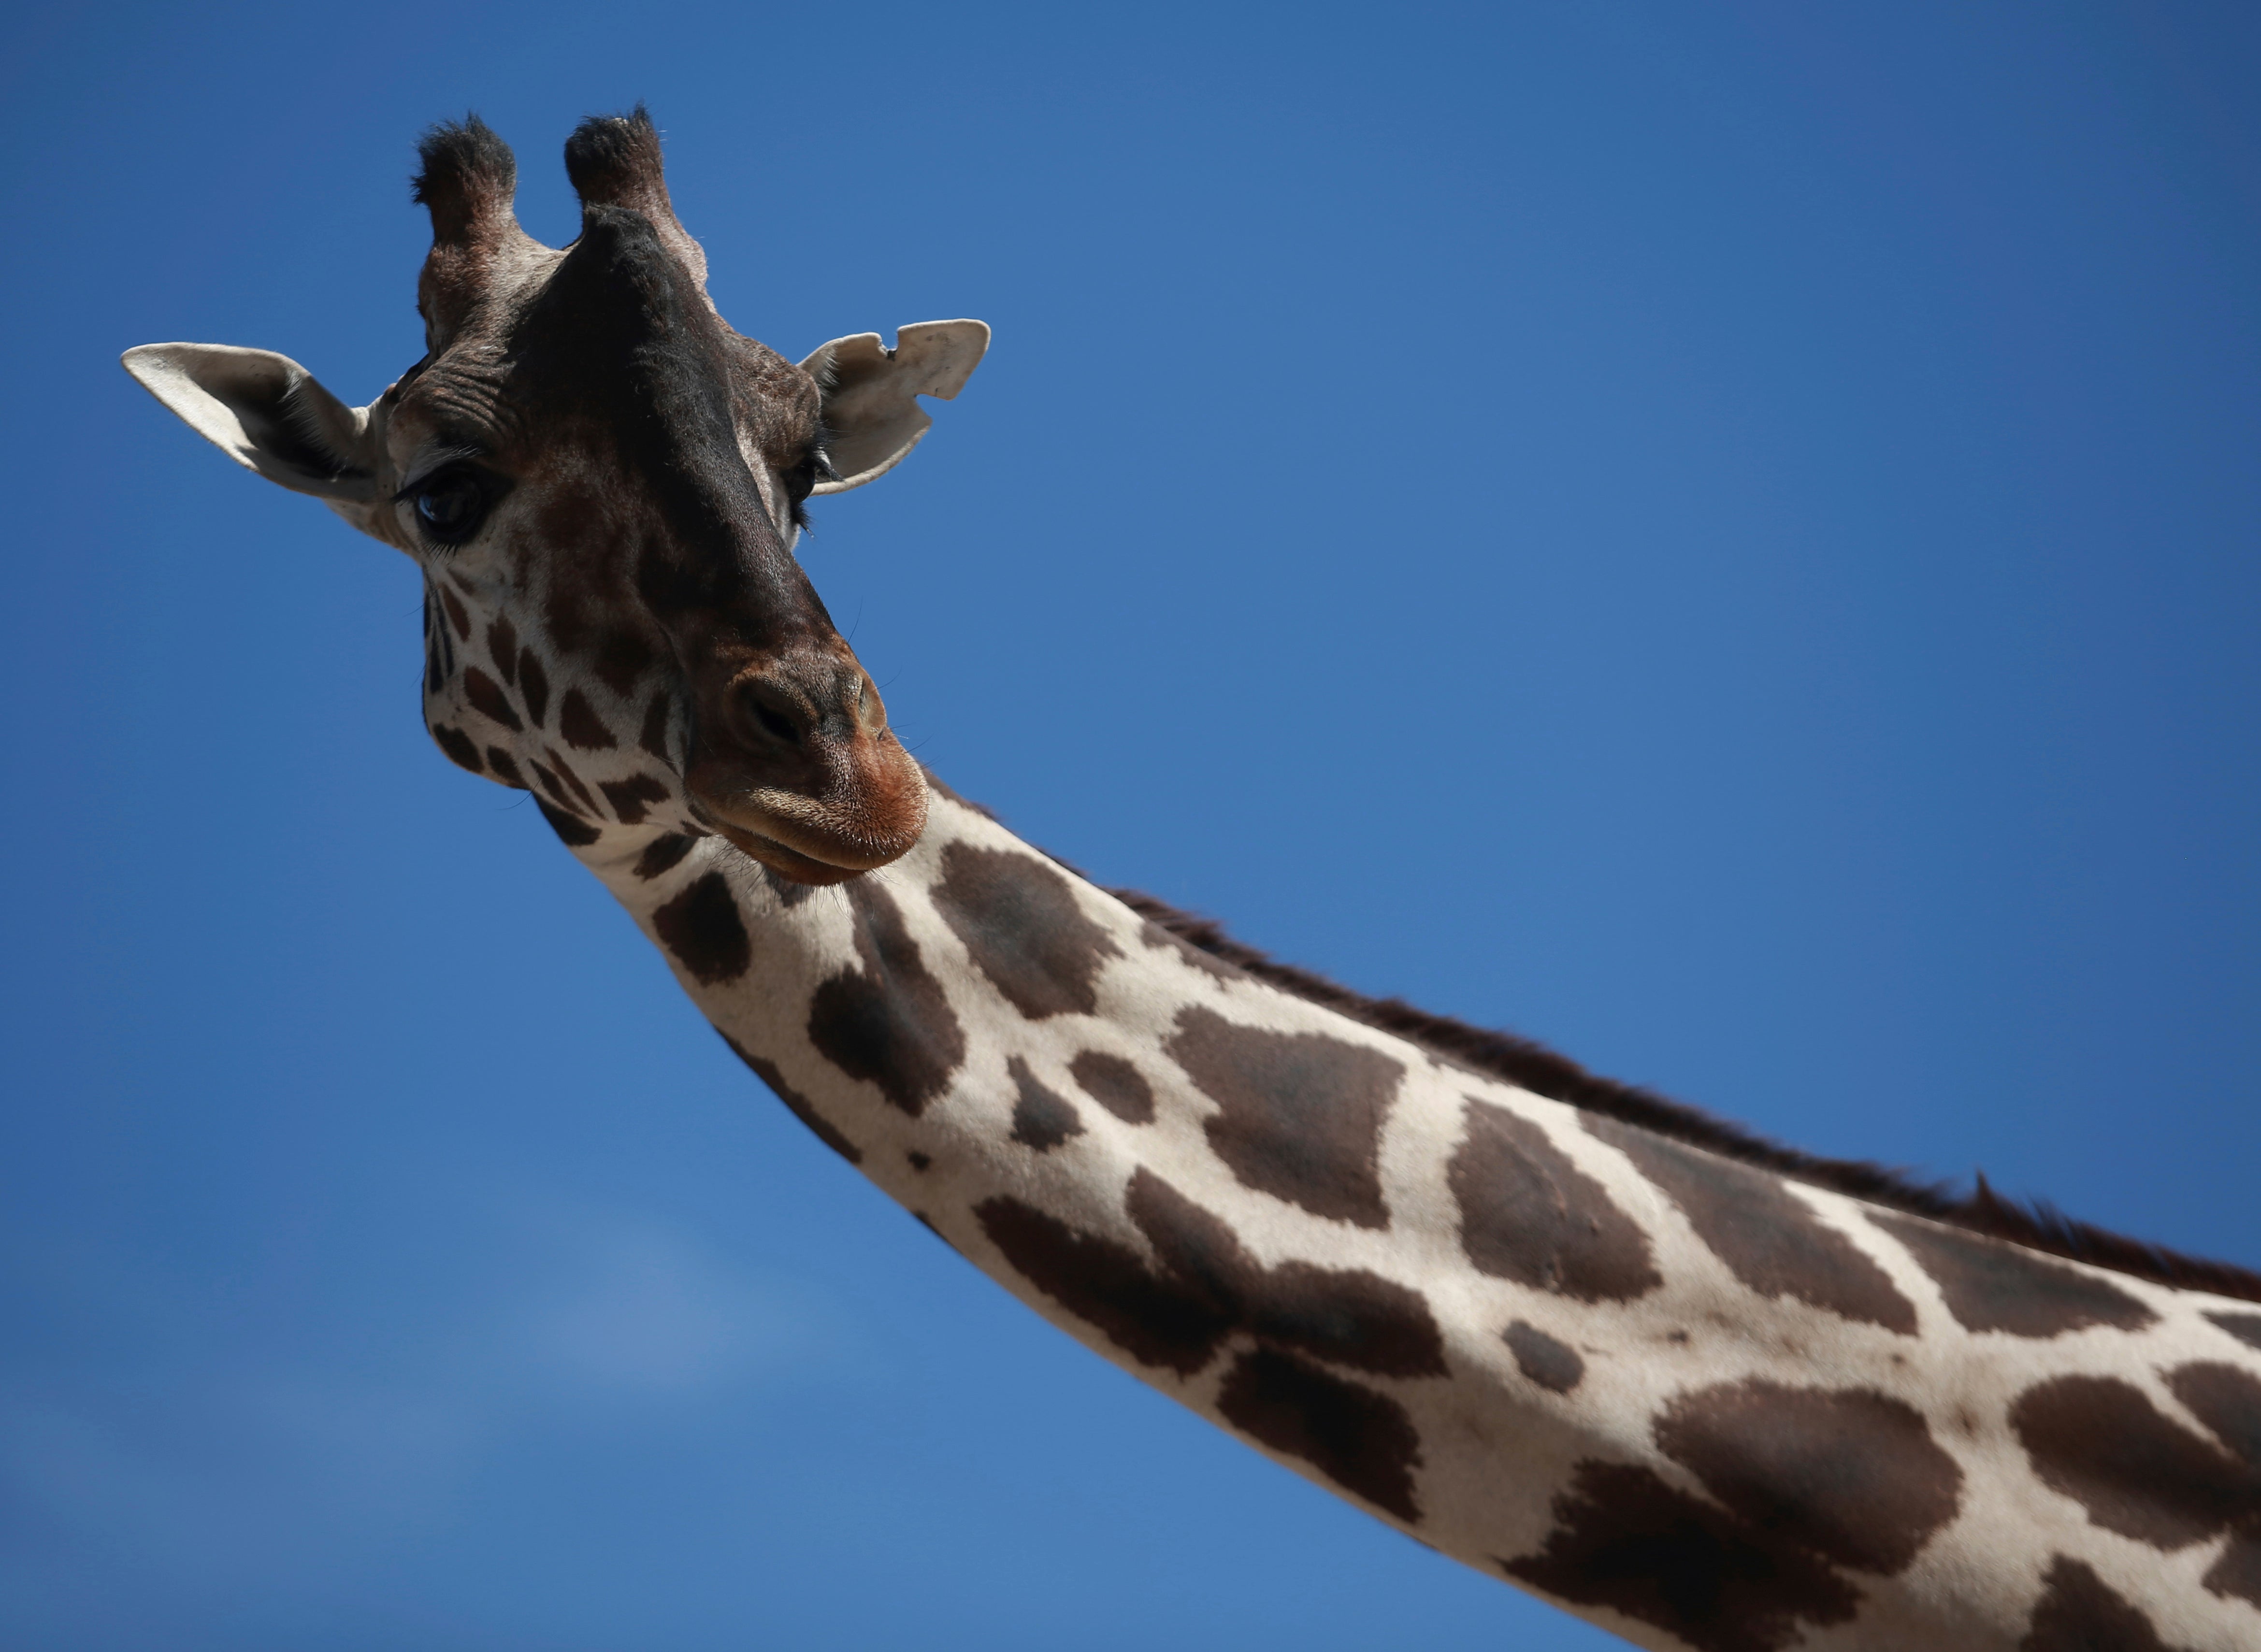 Giraffes are generally pretty calm animals, but can get agitated during a total eclipse and start running around as if pursued by a predator